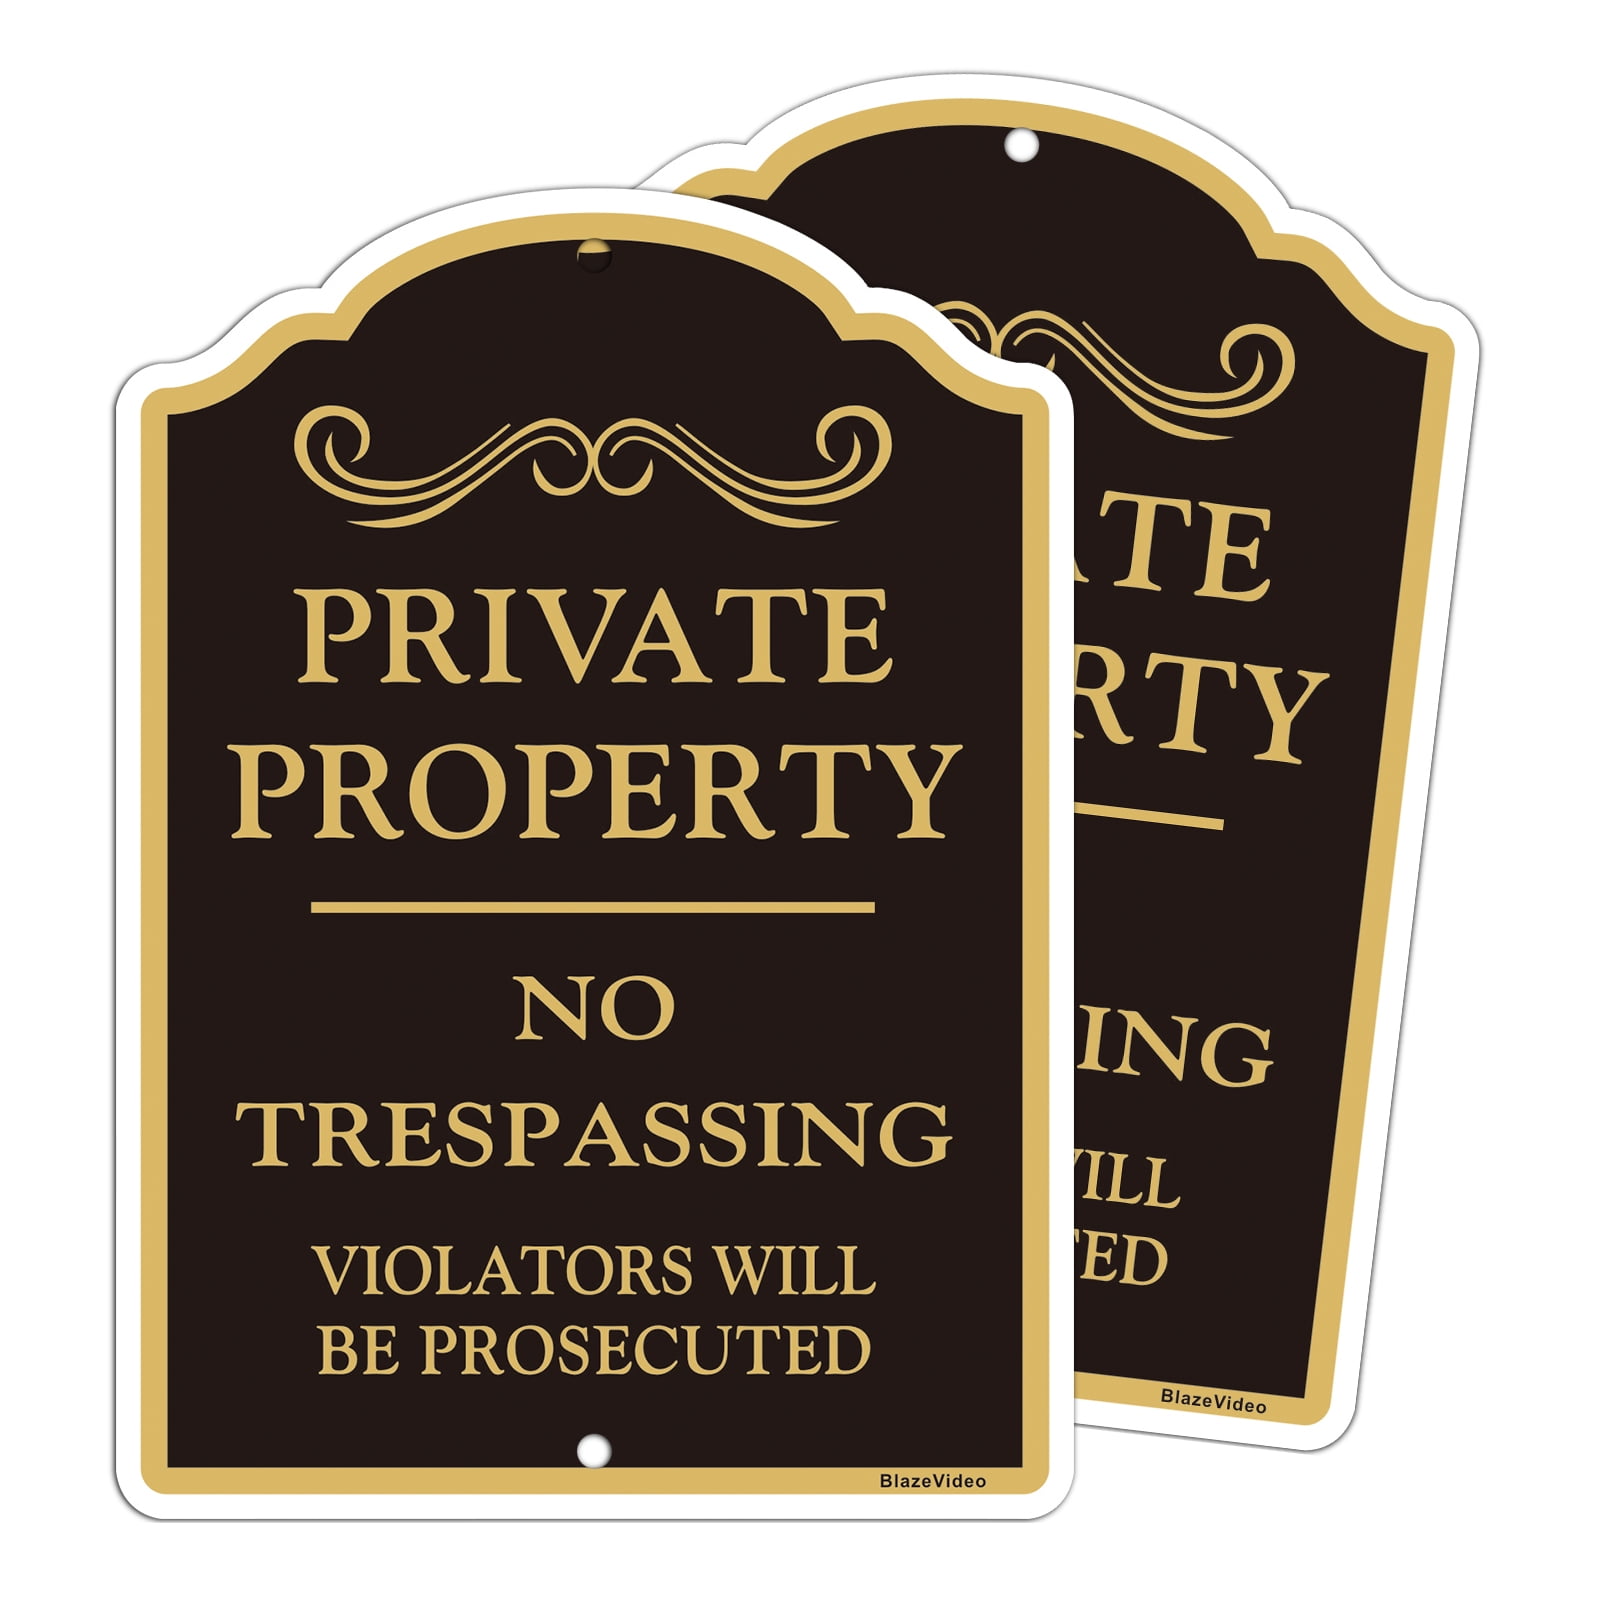 "PRIVATE PROPERTY DO NOT TOUCH OR FEED THE HORSES" METAL SIGN NO TRESPASSING